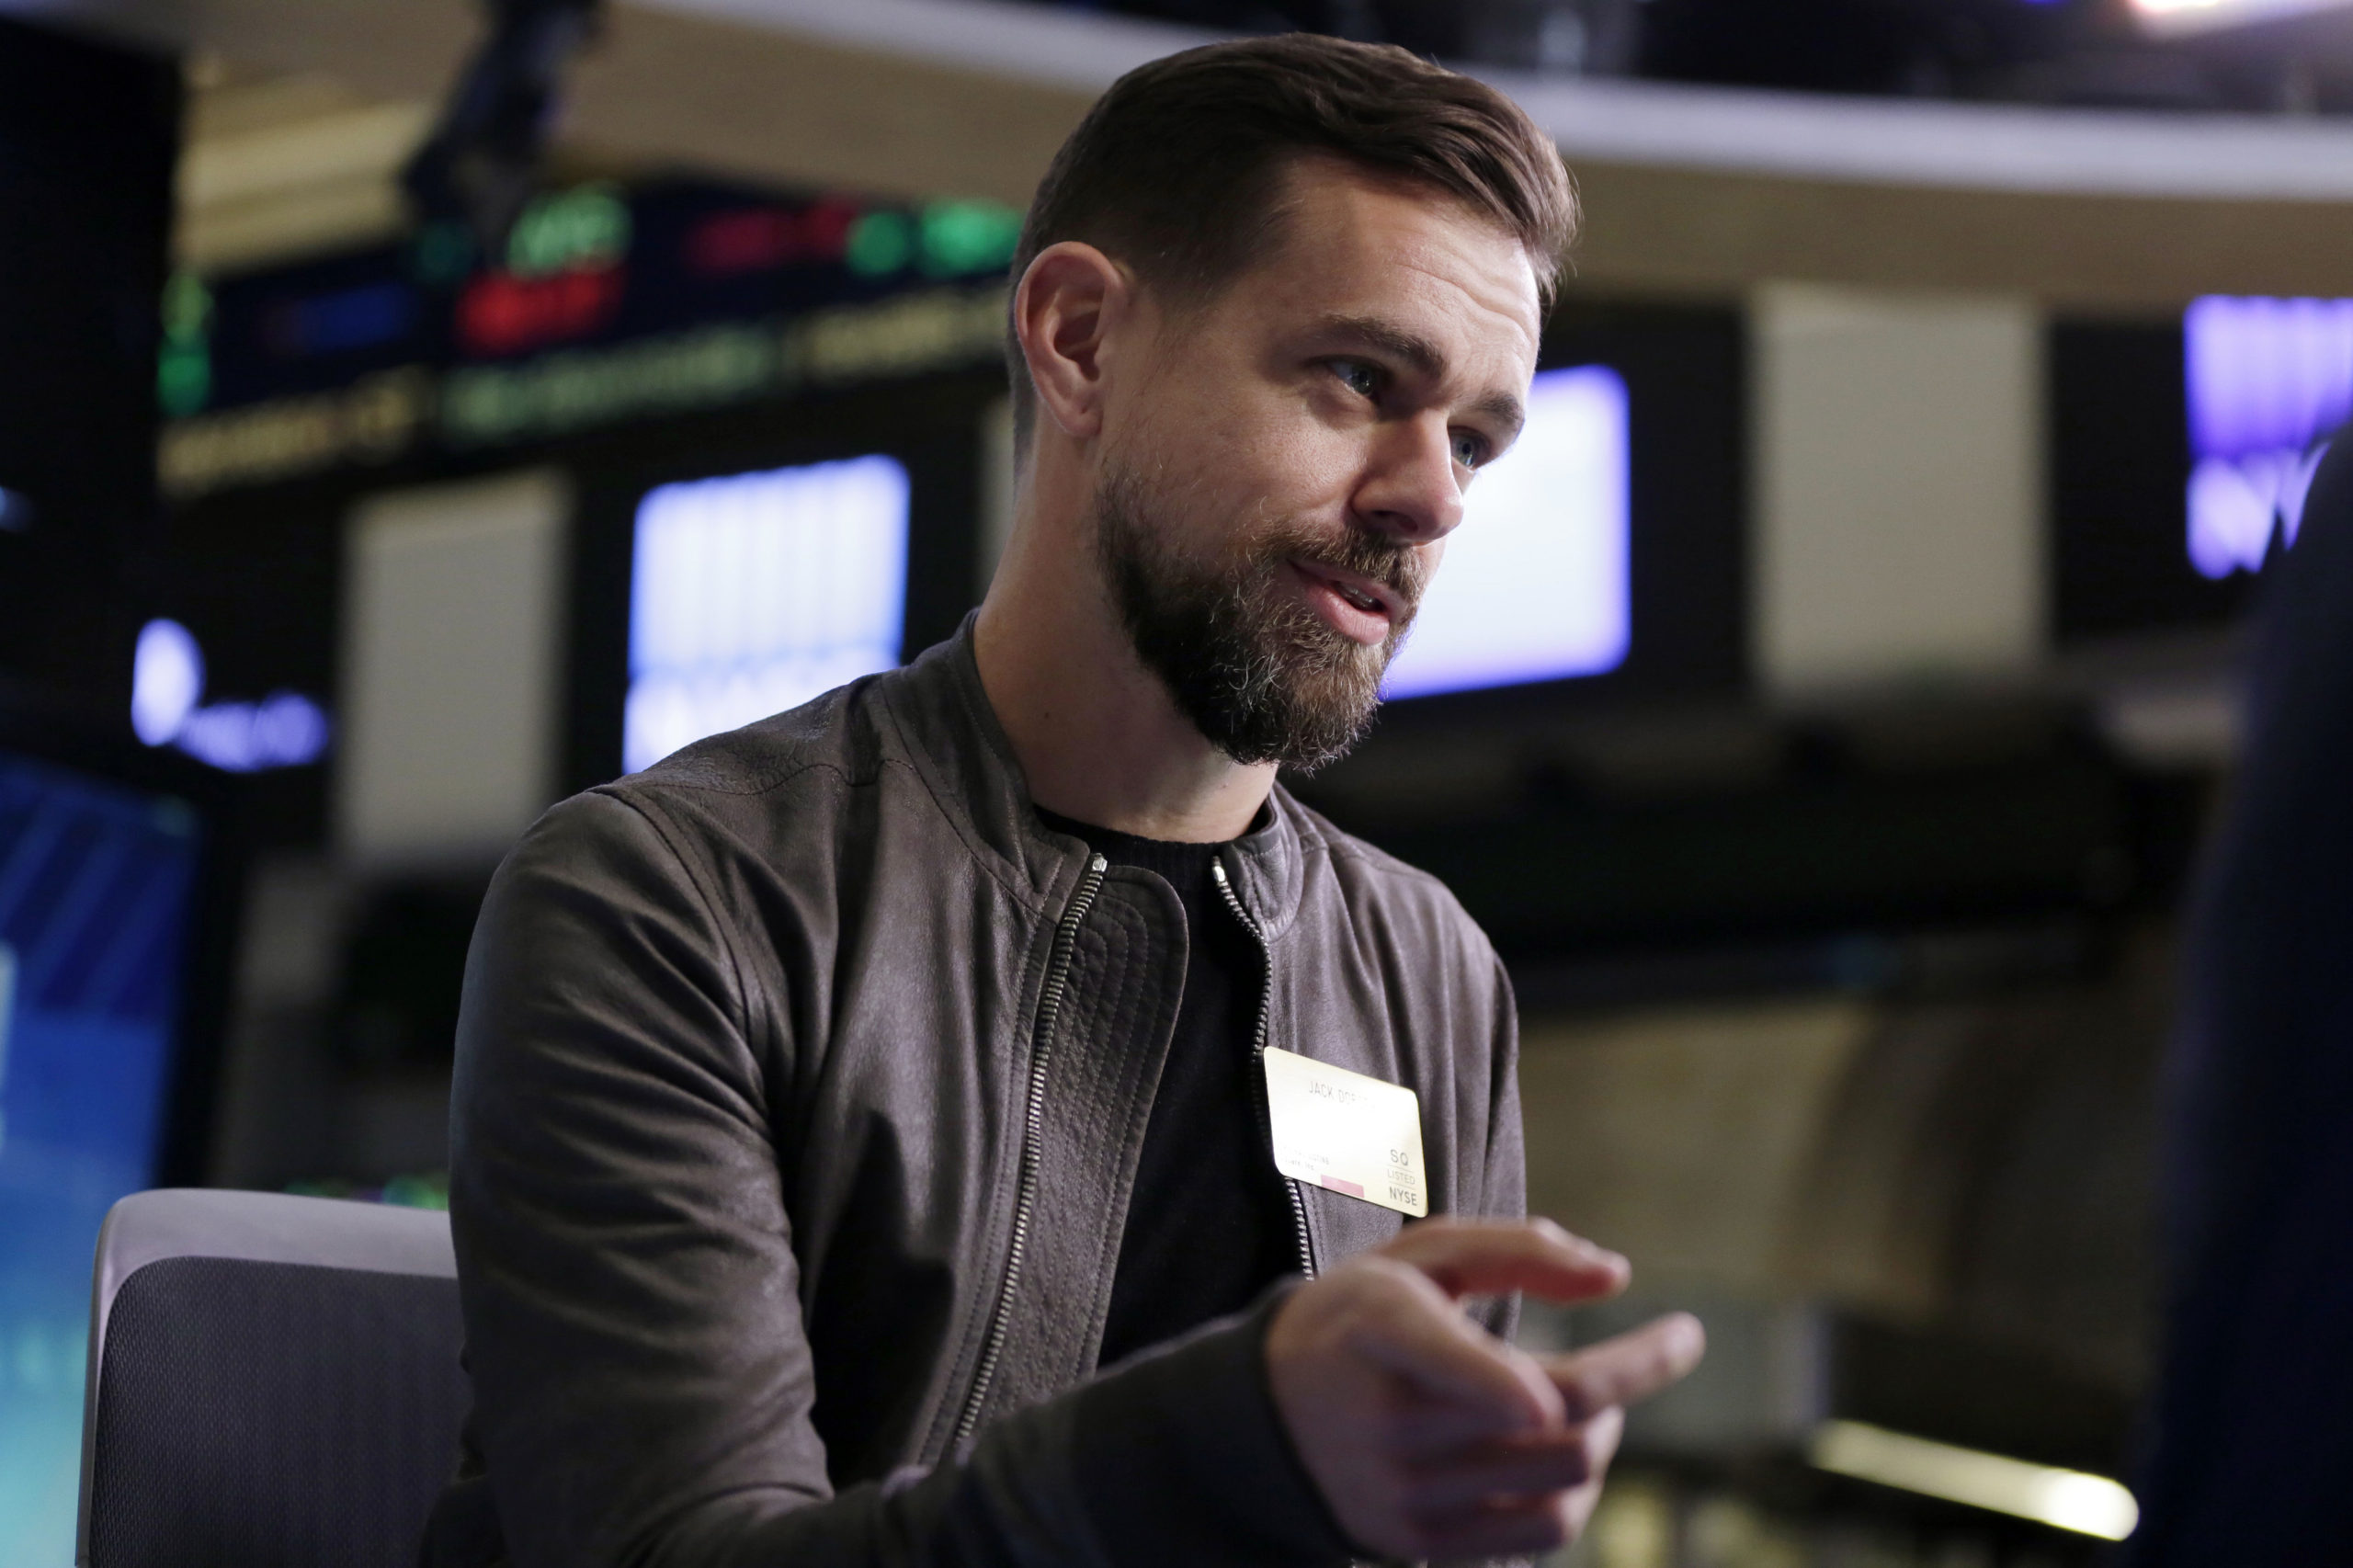 Twitter Co-Founder, Jack Dorsey, Launches New Social Media App, Bluesky, Twitter Co-Founder, Jack Dorsey's First Tweet Sold as an NFT at a Closing Price of $2.9 Million | Techuncode.com